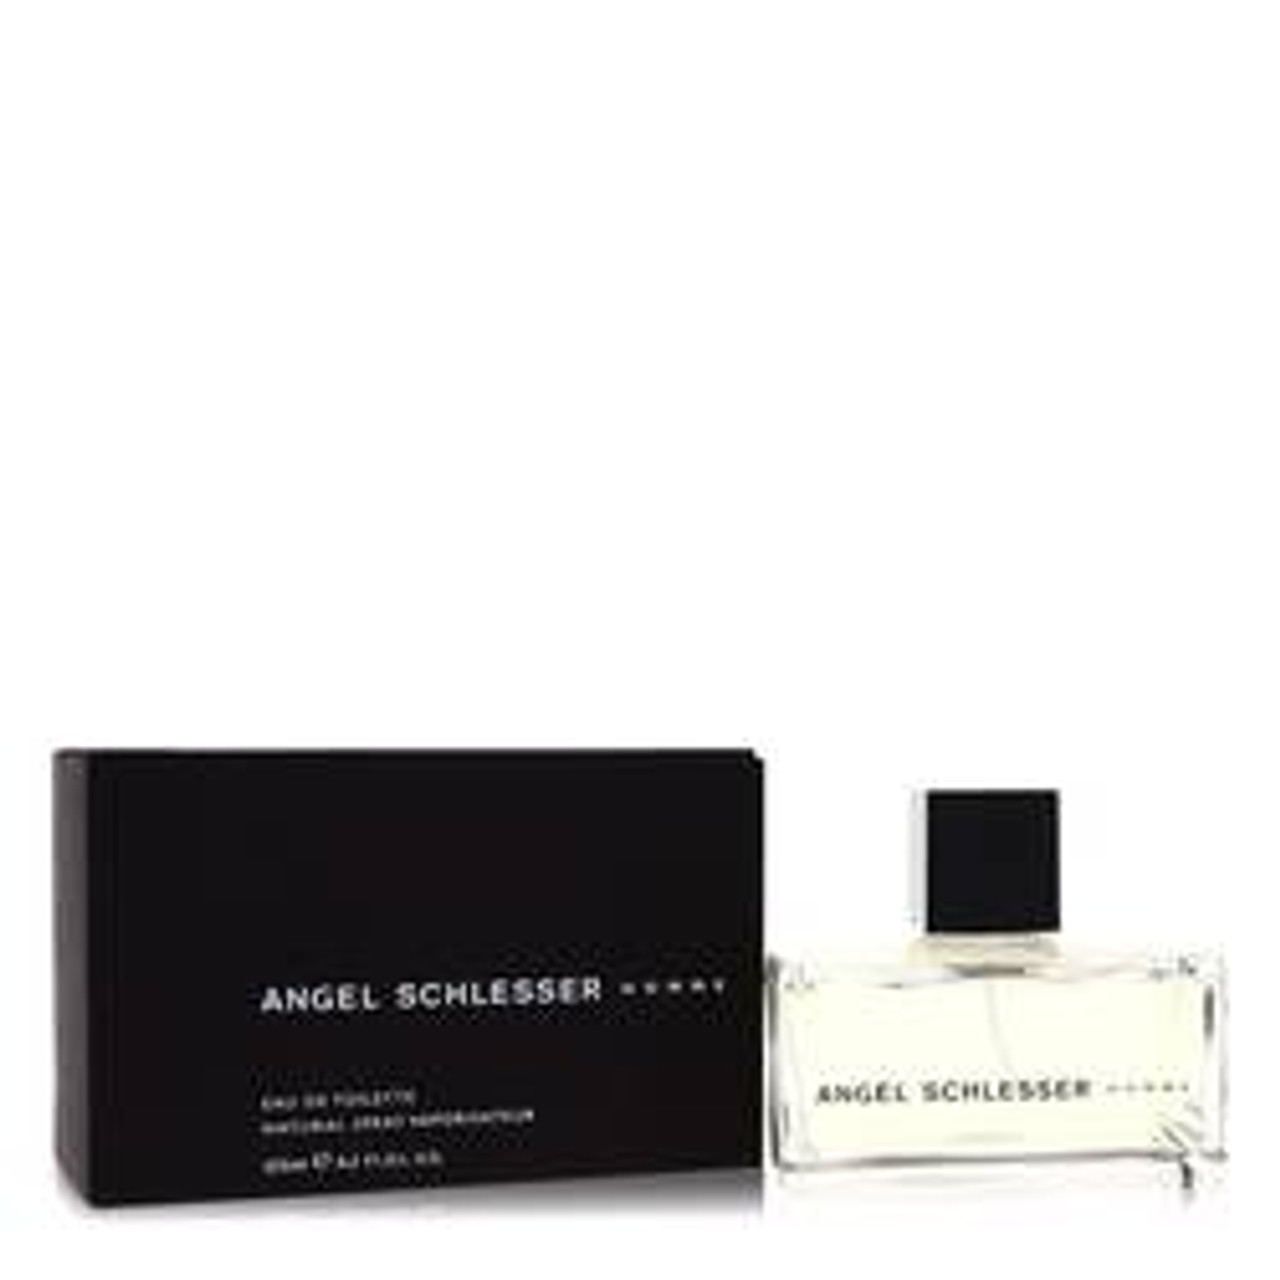 Angel Schlesser Cologne By Angel Schlesser Eau De Toilette Spray 4.2 oz for Men - [From 96.00 - Choose pk Qty ] - *Ships from Miami